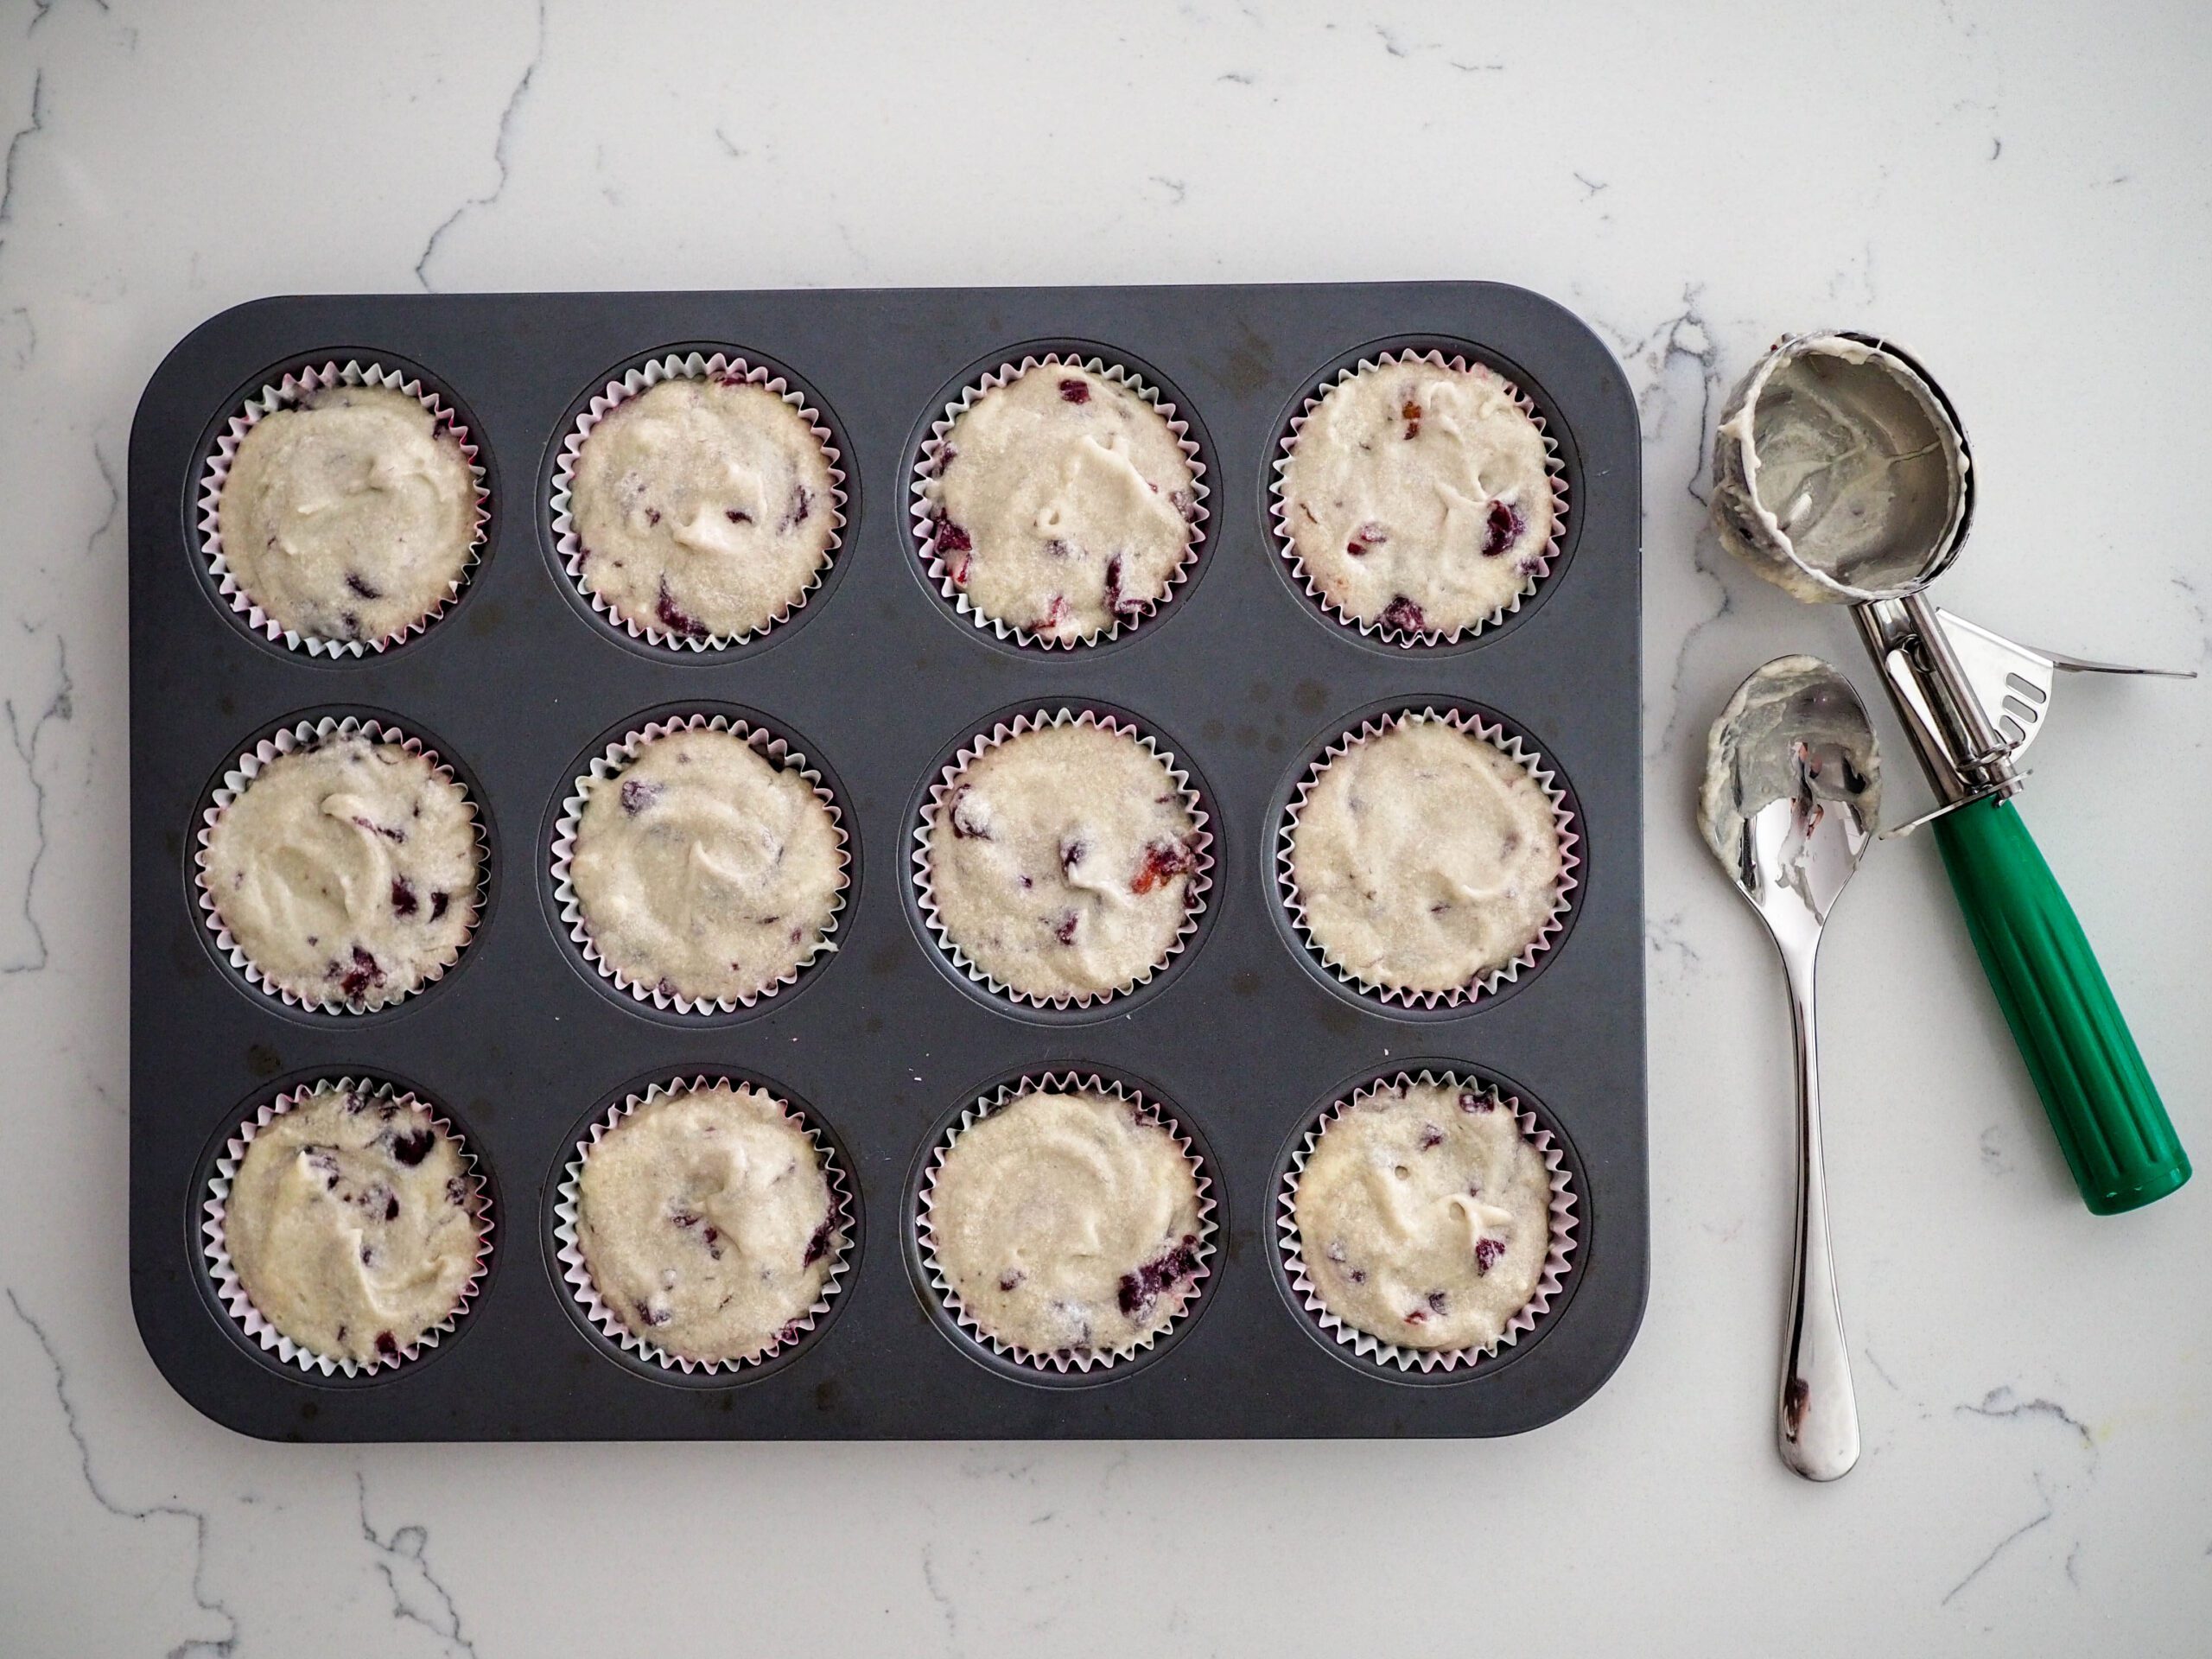 A muffin tin with cherry almond cupcake batter filled to the brim of each baking cup. A scooper and spoon lay on the counter next to it.